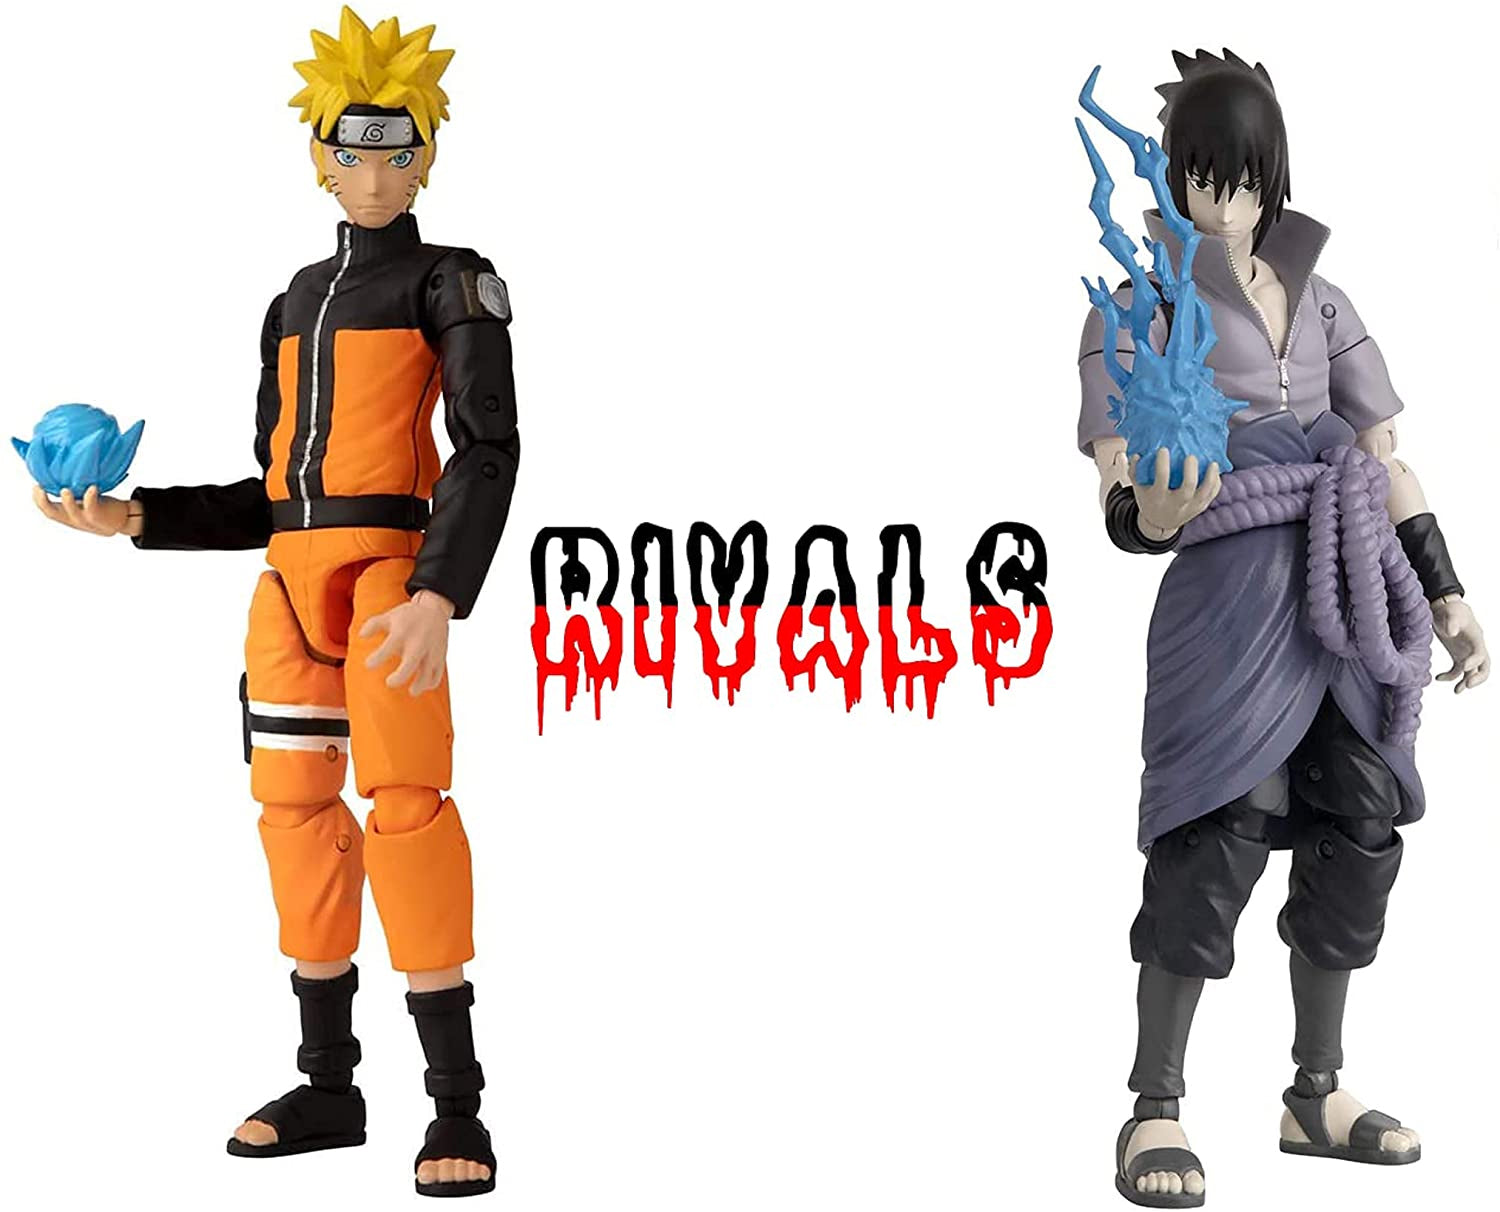 Bandai Anime Heroes Naruto - Naruto Uzumaki 6.5-in Action Figure with  Accessory Pack